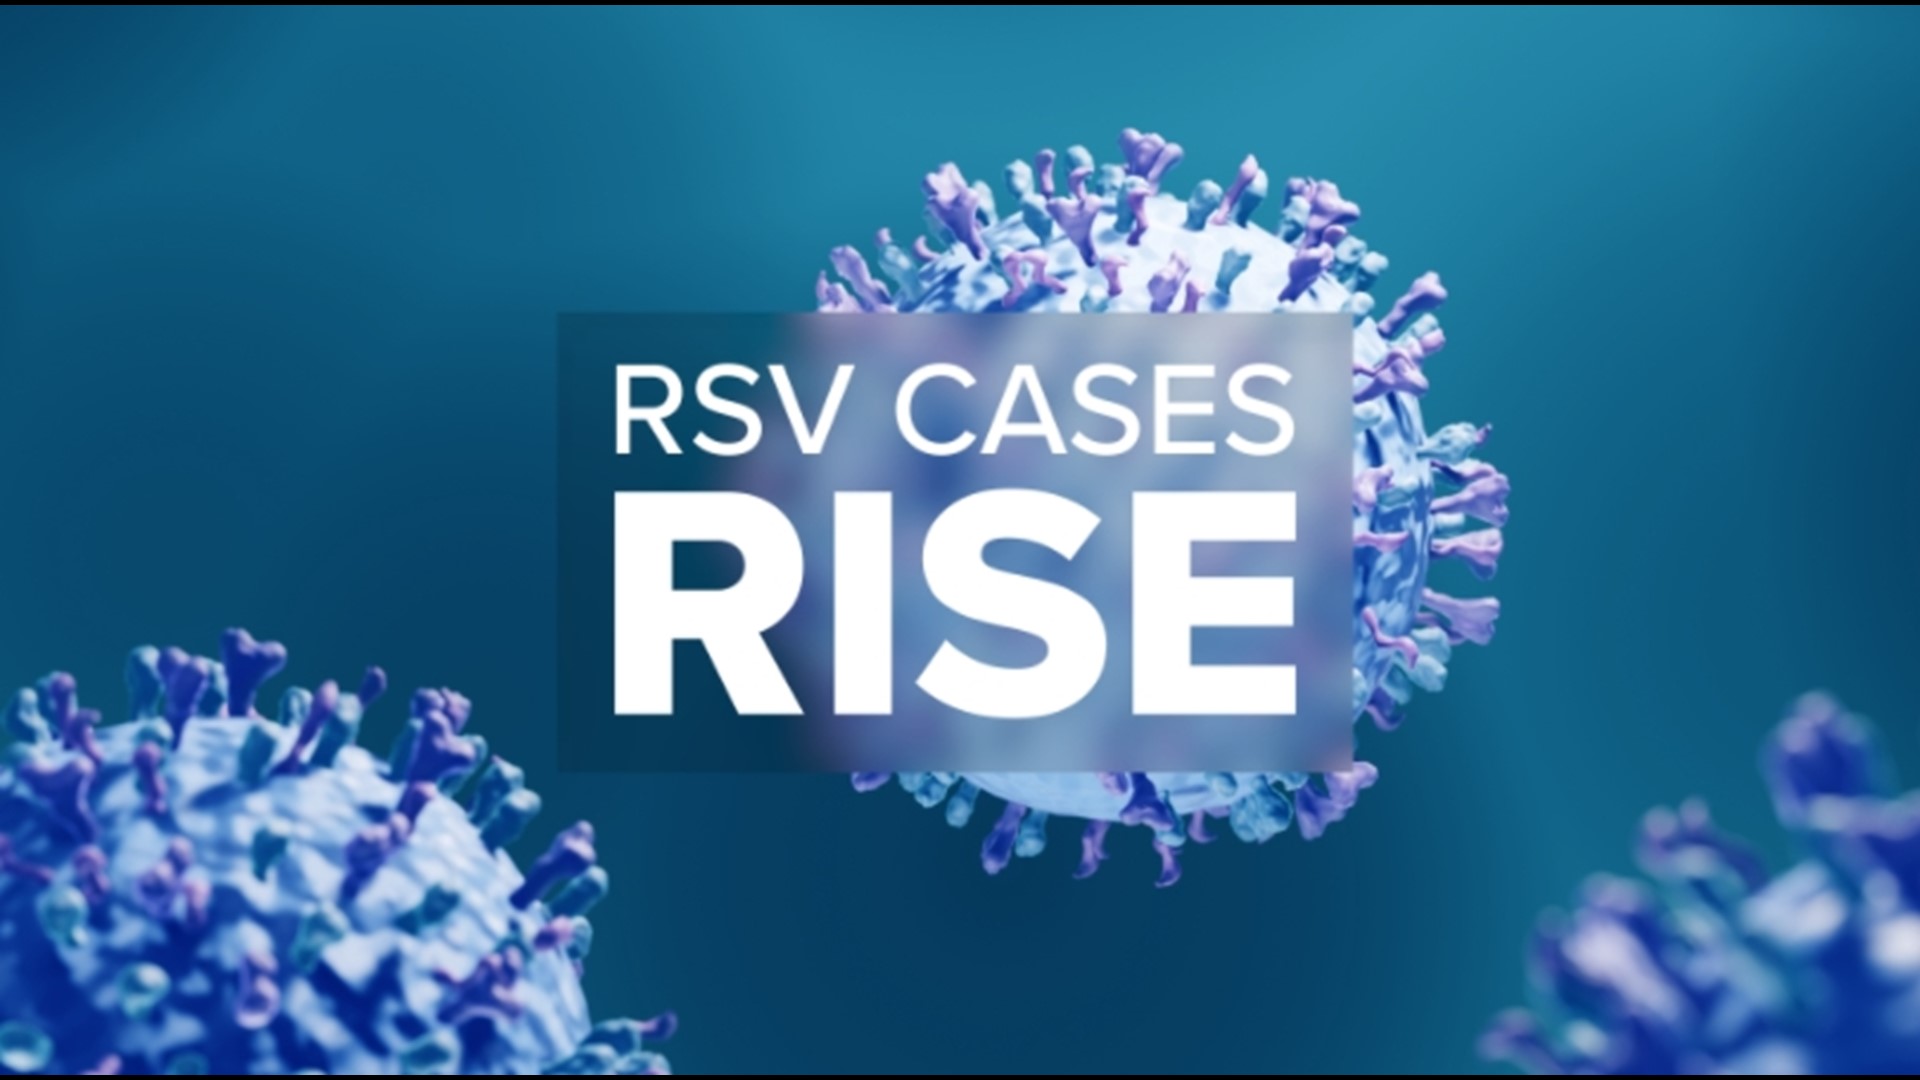 The Michigan Department of Health and Human Services says it is seeing a lot of Respiratory Syncytial Virus (RSV) cases around the state.